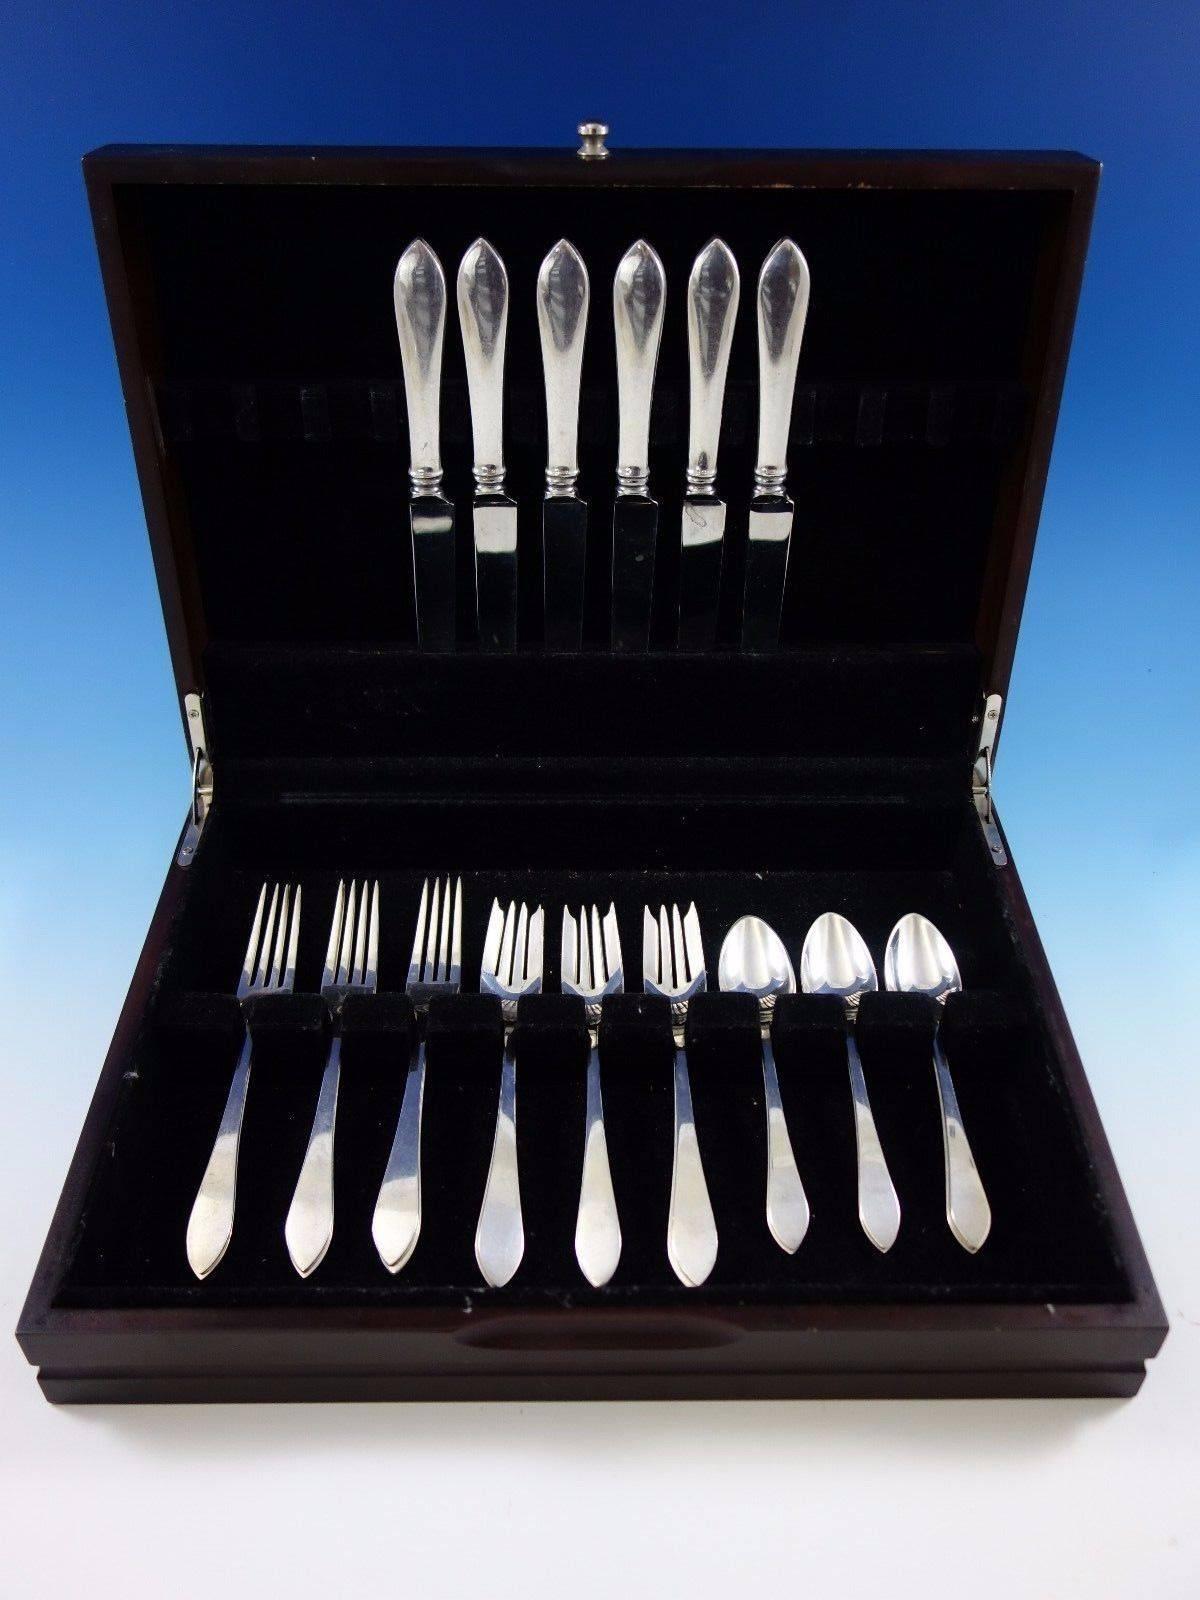 This set includes:

Six knives, 9 1/4